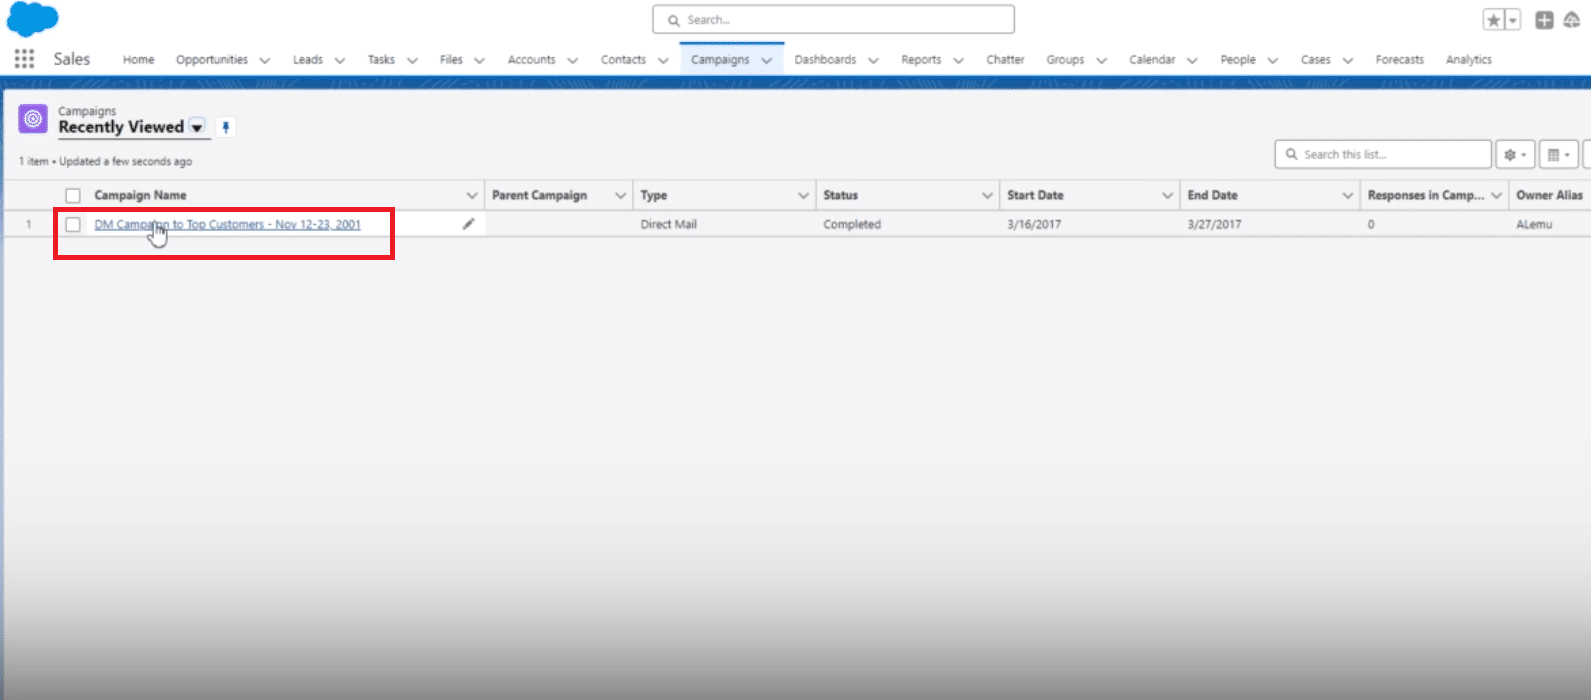 Interface highlighting the selection of a specific campaign for data export in Salesforce.